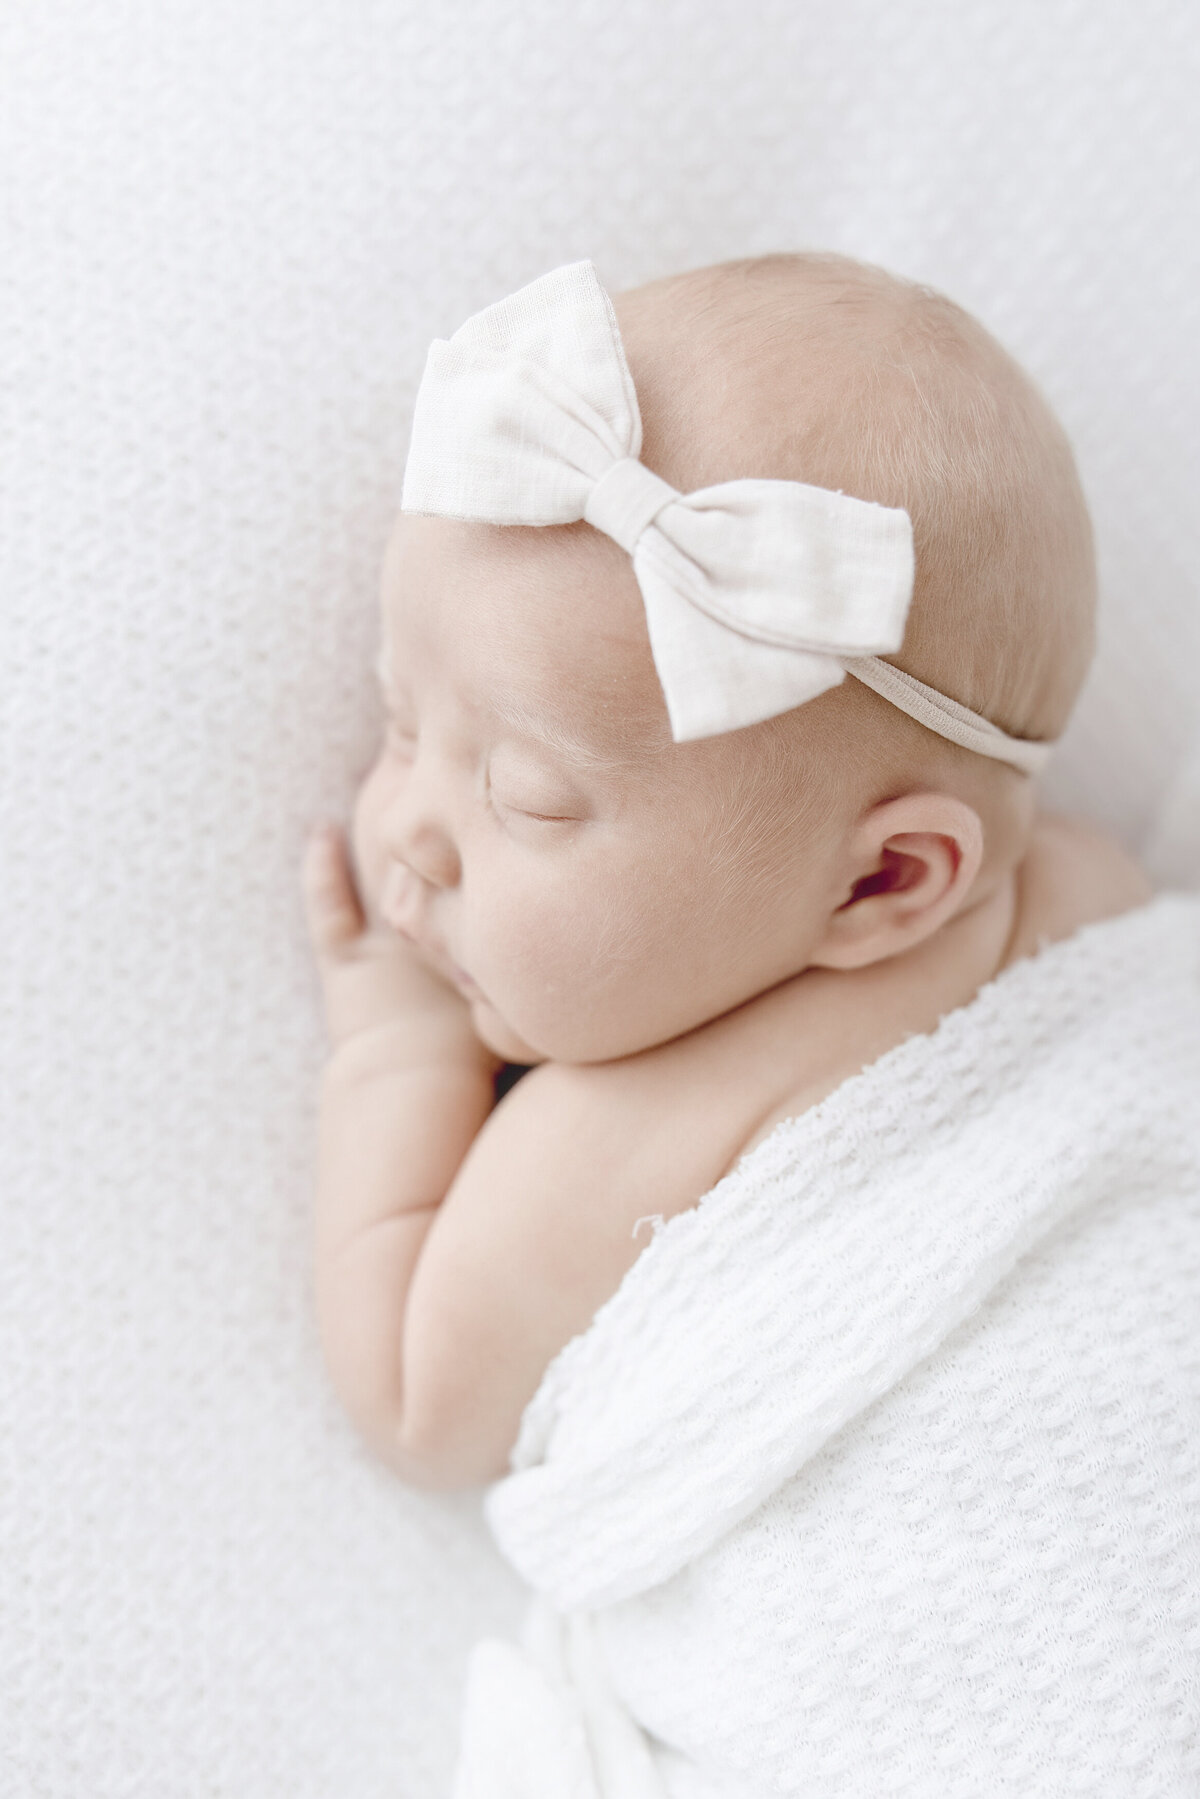 Newborn baby with white wrap and bow